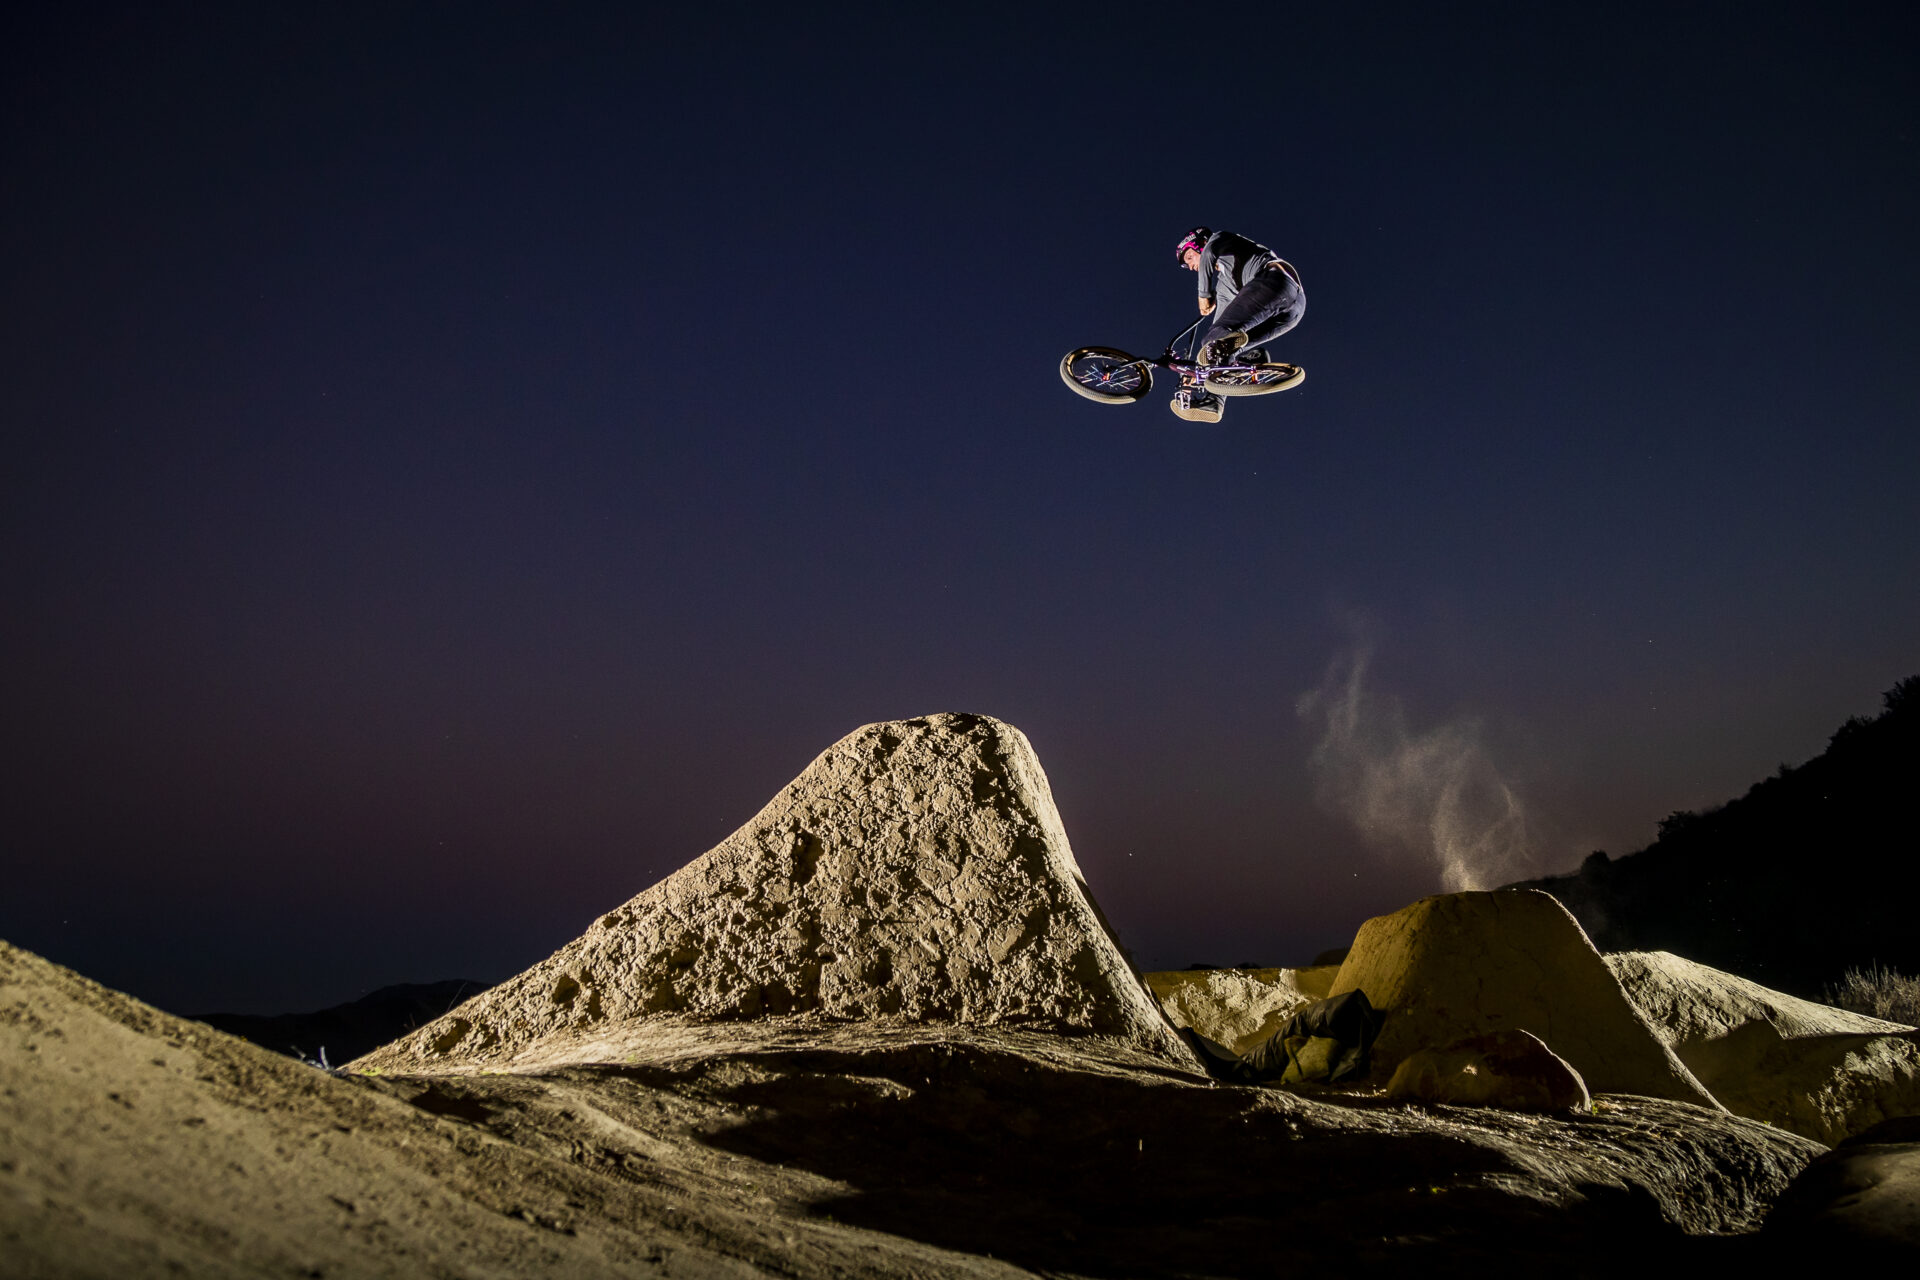 Anthony Napo boosting a jump in the night